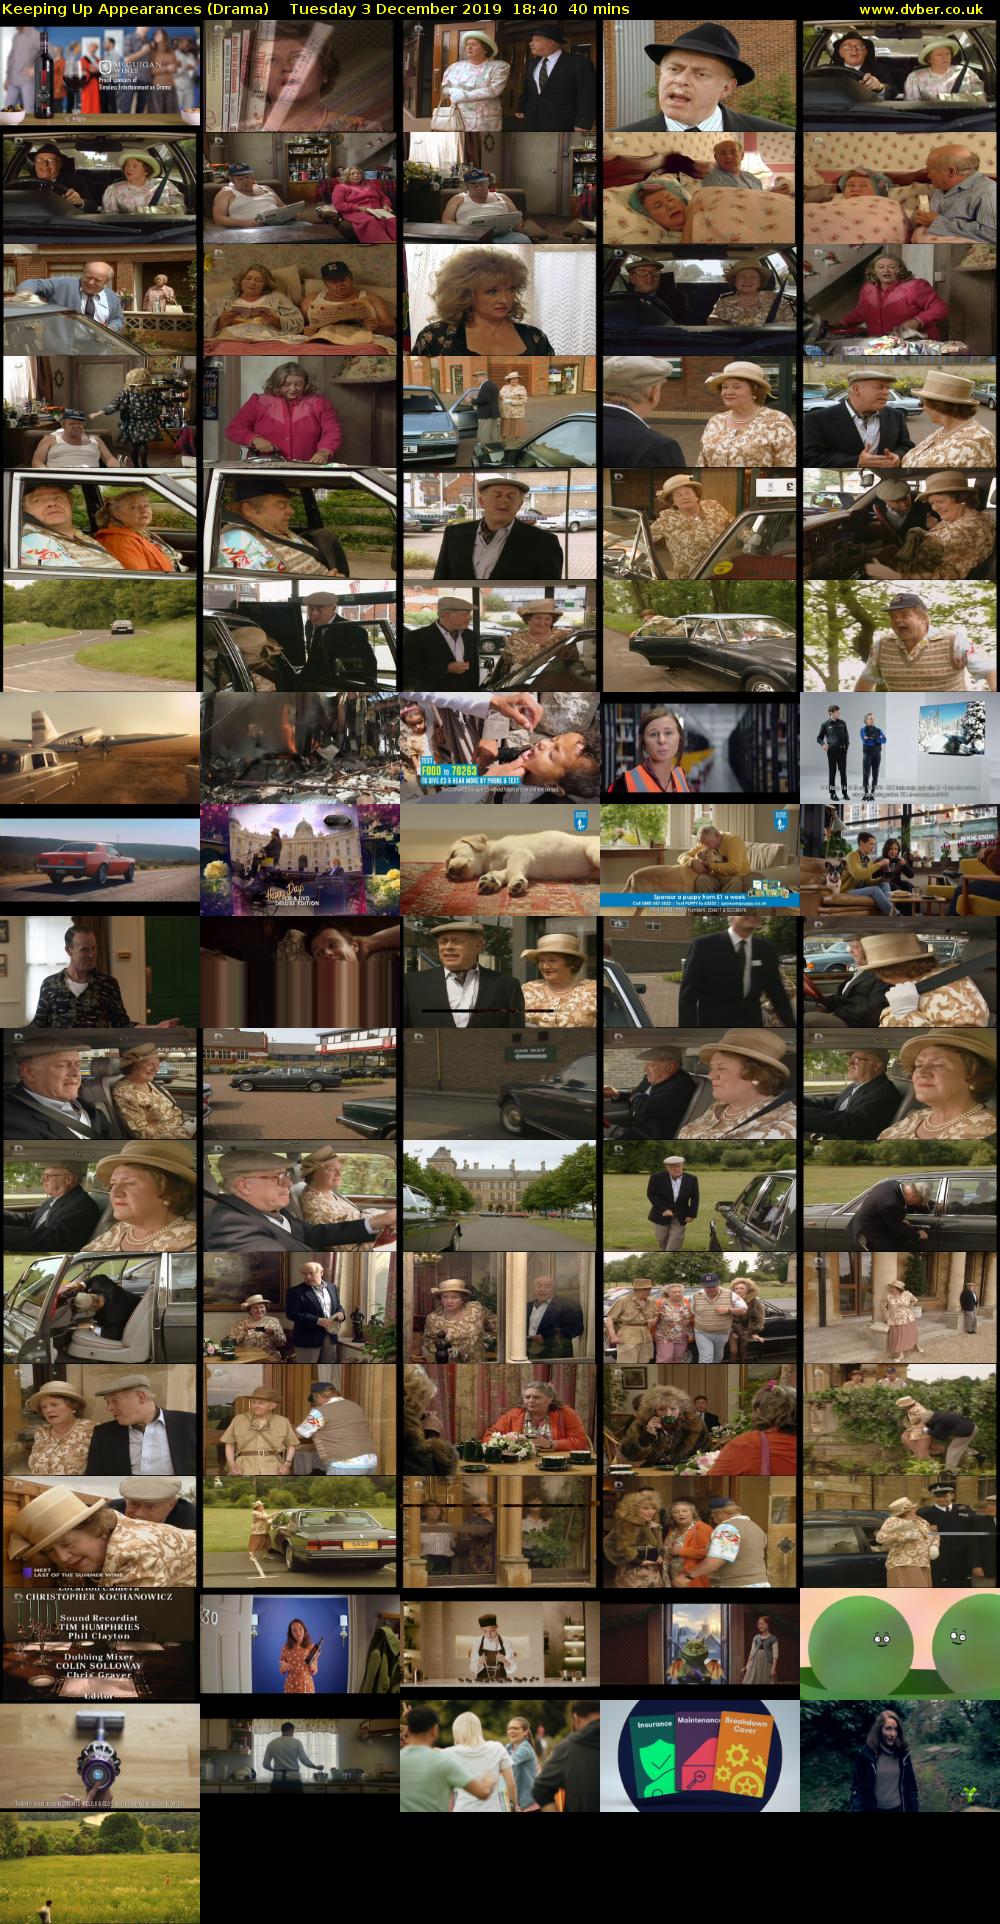 Keeping Up Appearances (Drama) Tuesday 3 December 2019 18:40 - 19:20